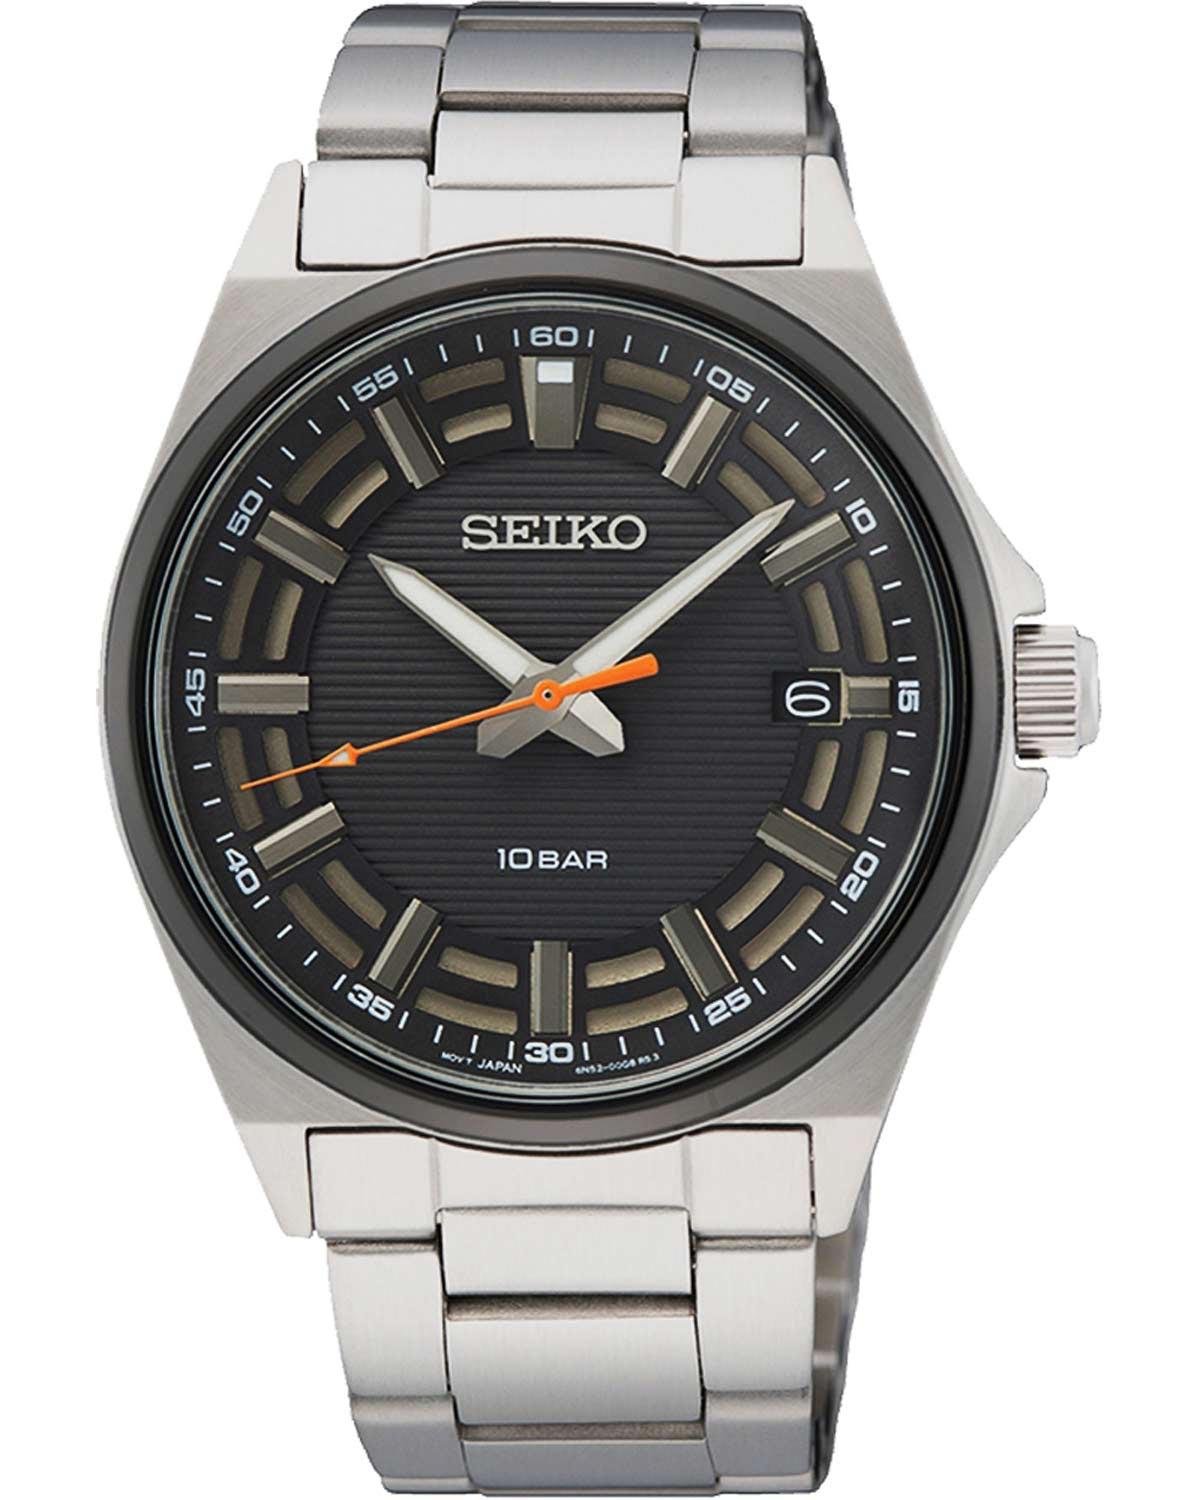 SEIKO Racing Sports - SUR507P1, Silver case with Stainless Steel Bracelet